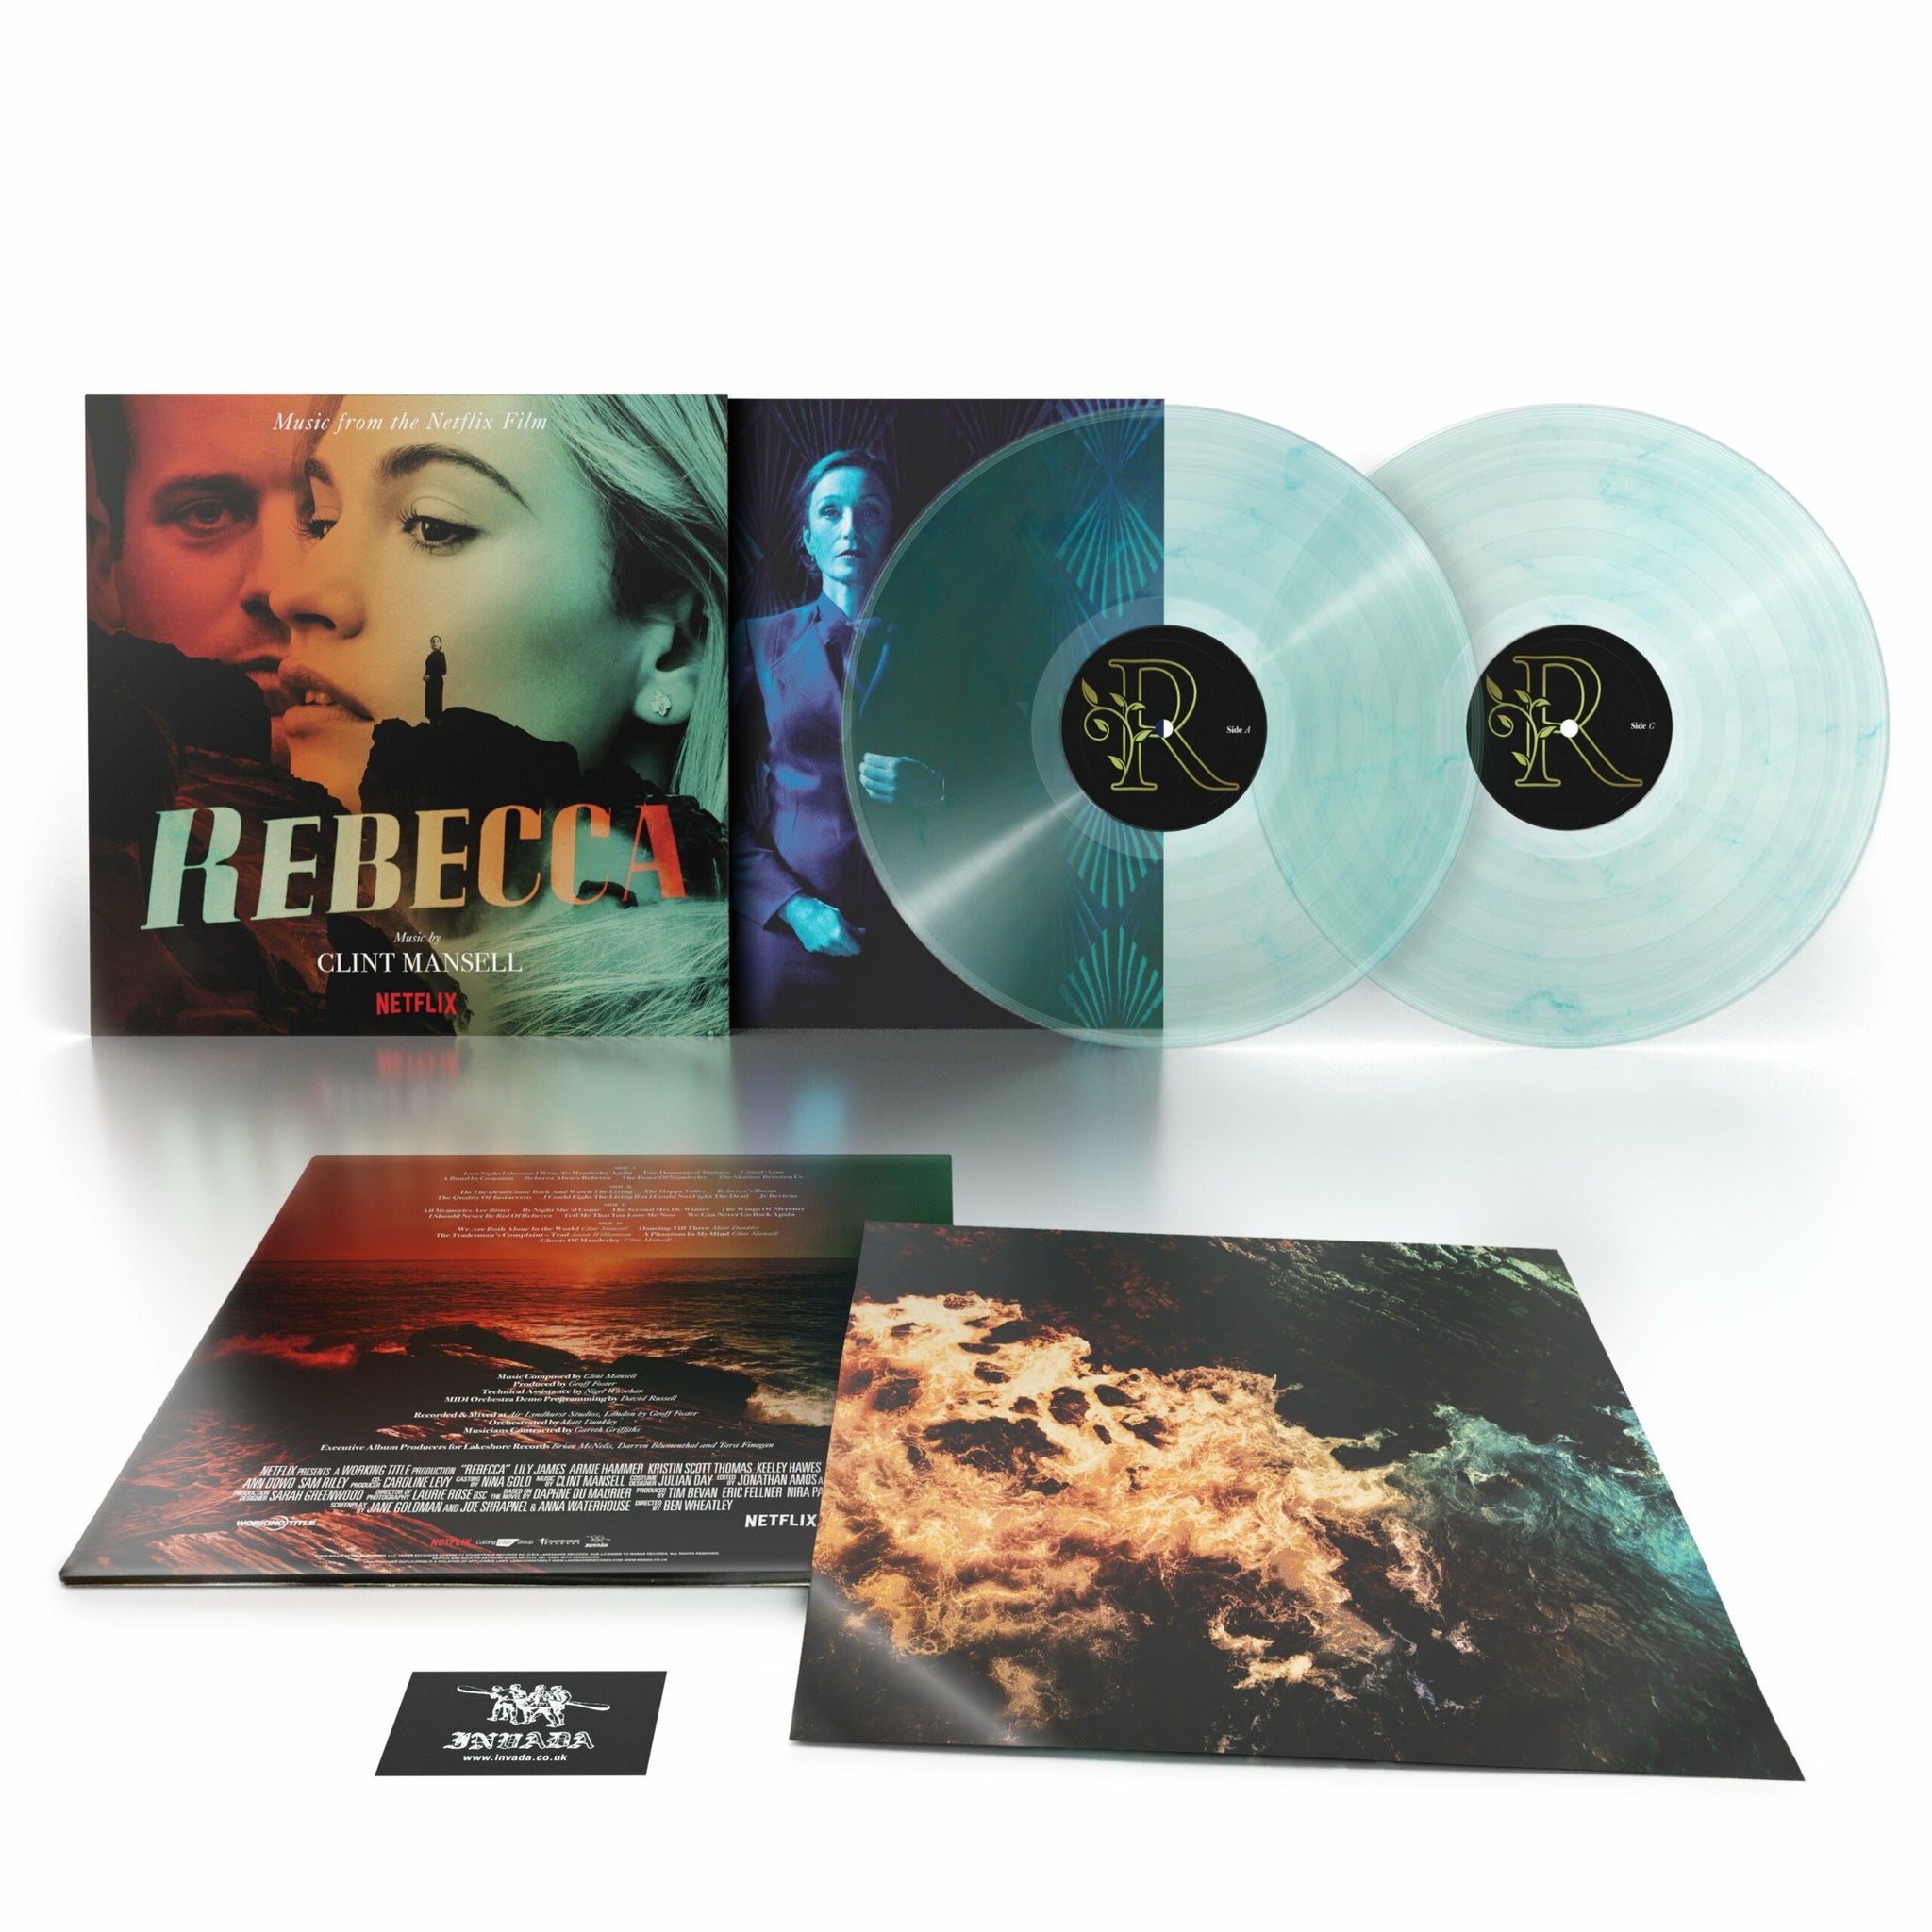 CLINT MANSELL - Rebecca (Music From The Netflix Film) - 2LP - Limited Translucent Marble Vinyl